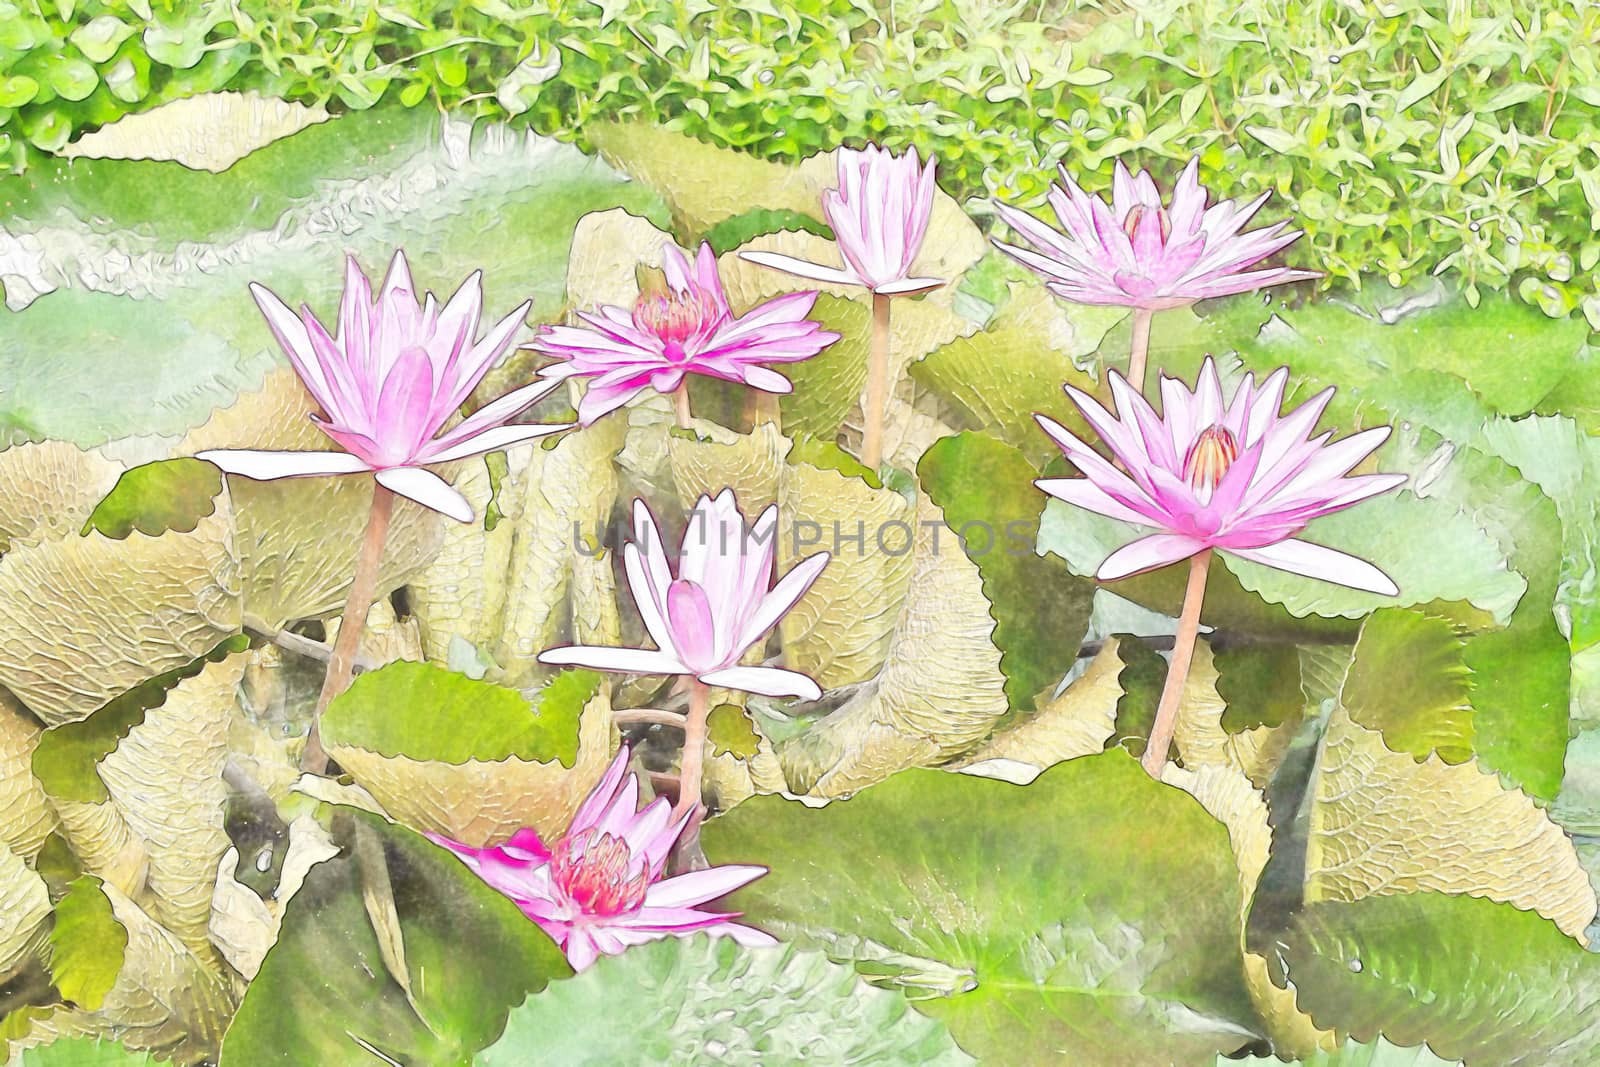 Image of a pink hardy water lily species with lilypads and a single blossom.